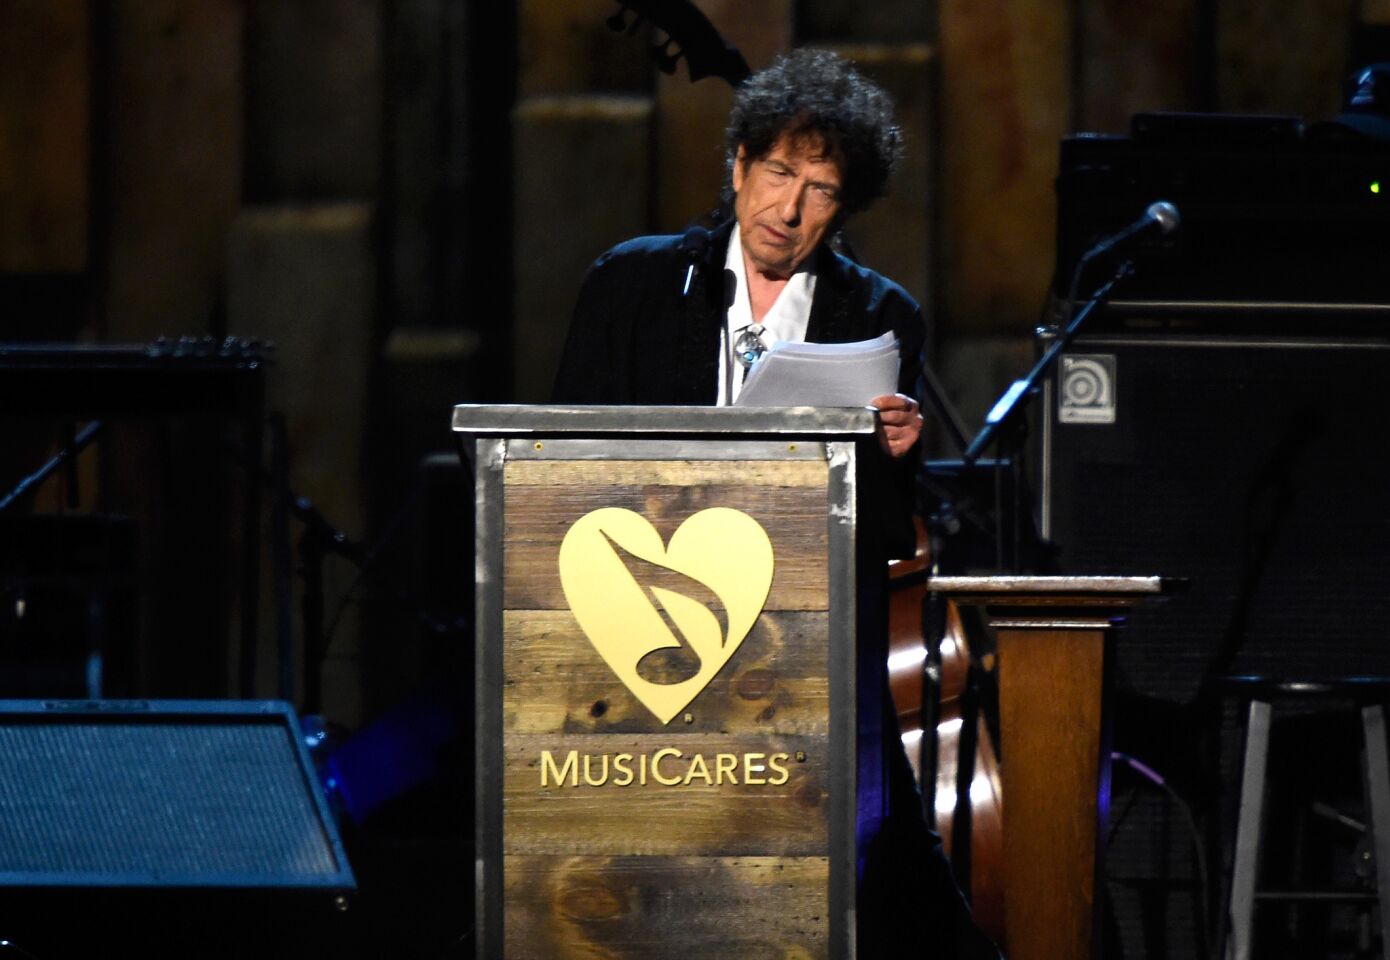 Dylan was honored at the MusiCares 2015 Person of the Year Gala on Feb. 6, 2015, where he delivered a lengthy speech about songwriting and musical inspiration.